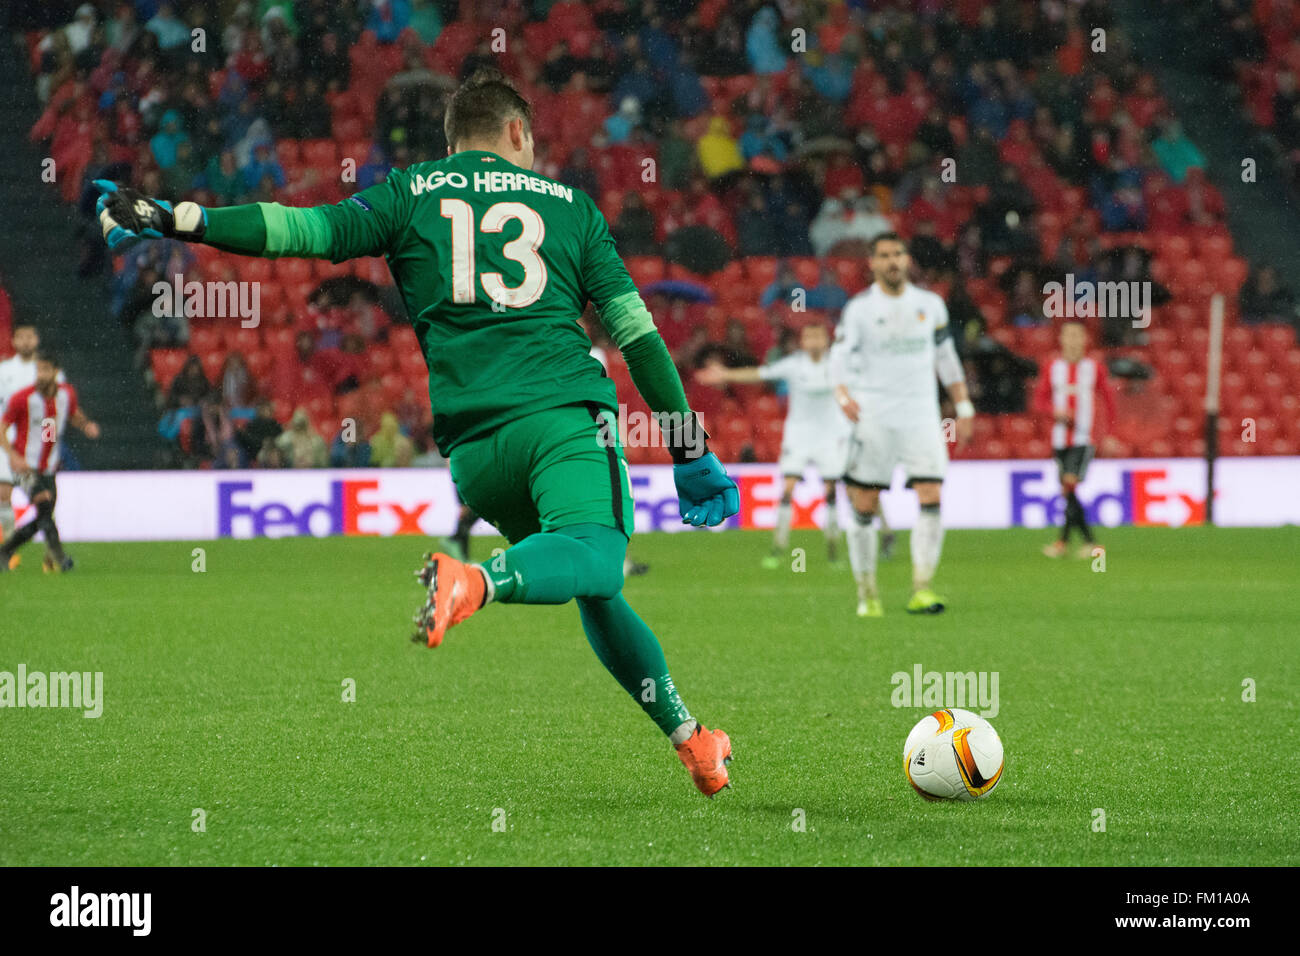 Bilbao, Spain. 10th March, 2016. Iago Herrerin (goalkeeper, Athletic Club) prepares to shot the ball during football match of round of 16 of UEFA Europe League between Athletic Club and Valencia CF at San Mames Stadium on March 10, 2016 in Bilbao, Spain. Credit:  David Gato/Alamy Live News Stock Photo